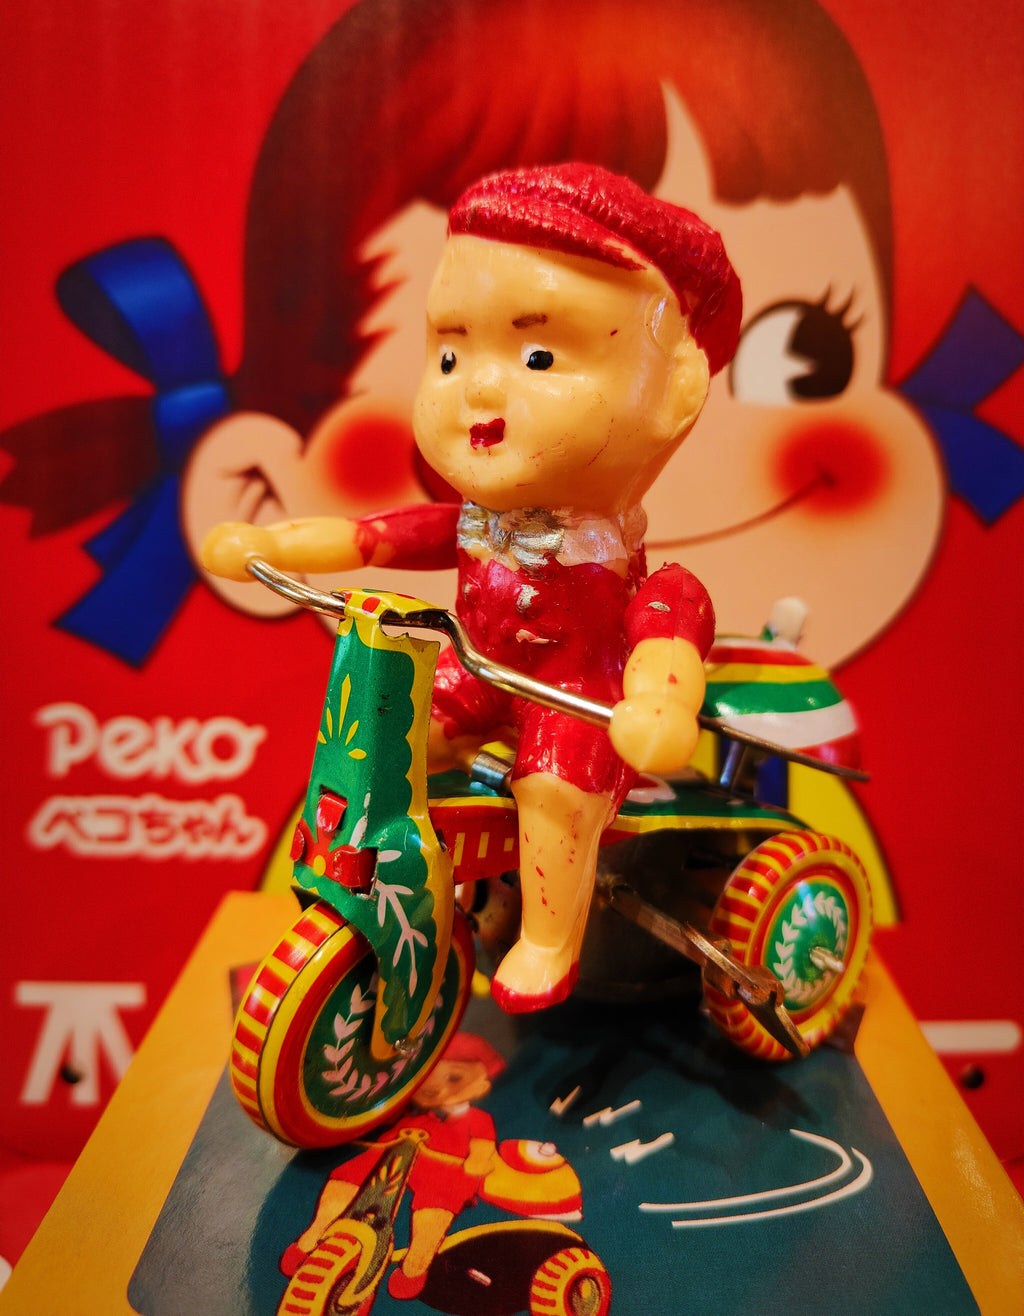  Check out this cool dude....pedalling around the neighborhood ....certainly one for the tin toy enthusiasts, since the box is equally as good as the tin toy!

9 x 10.5 x 6 cm

Not suitable as children's toy

